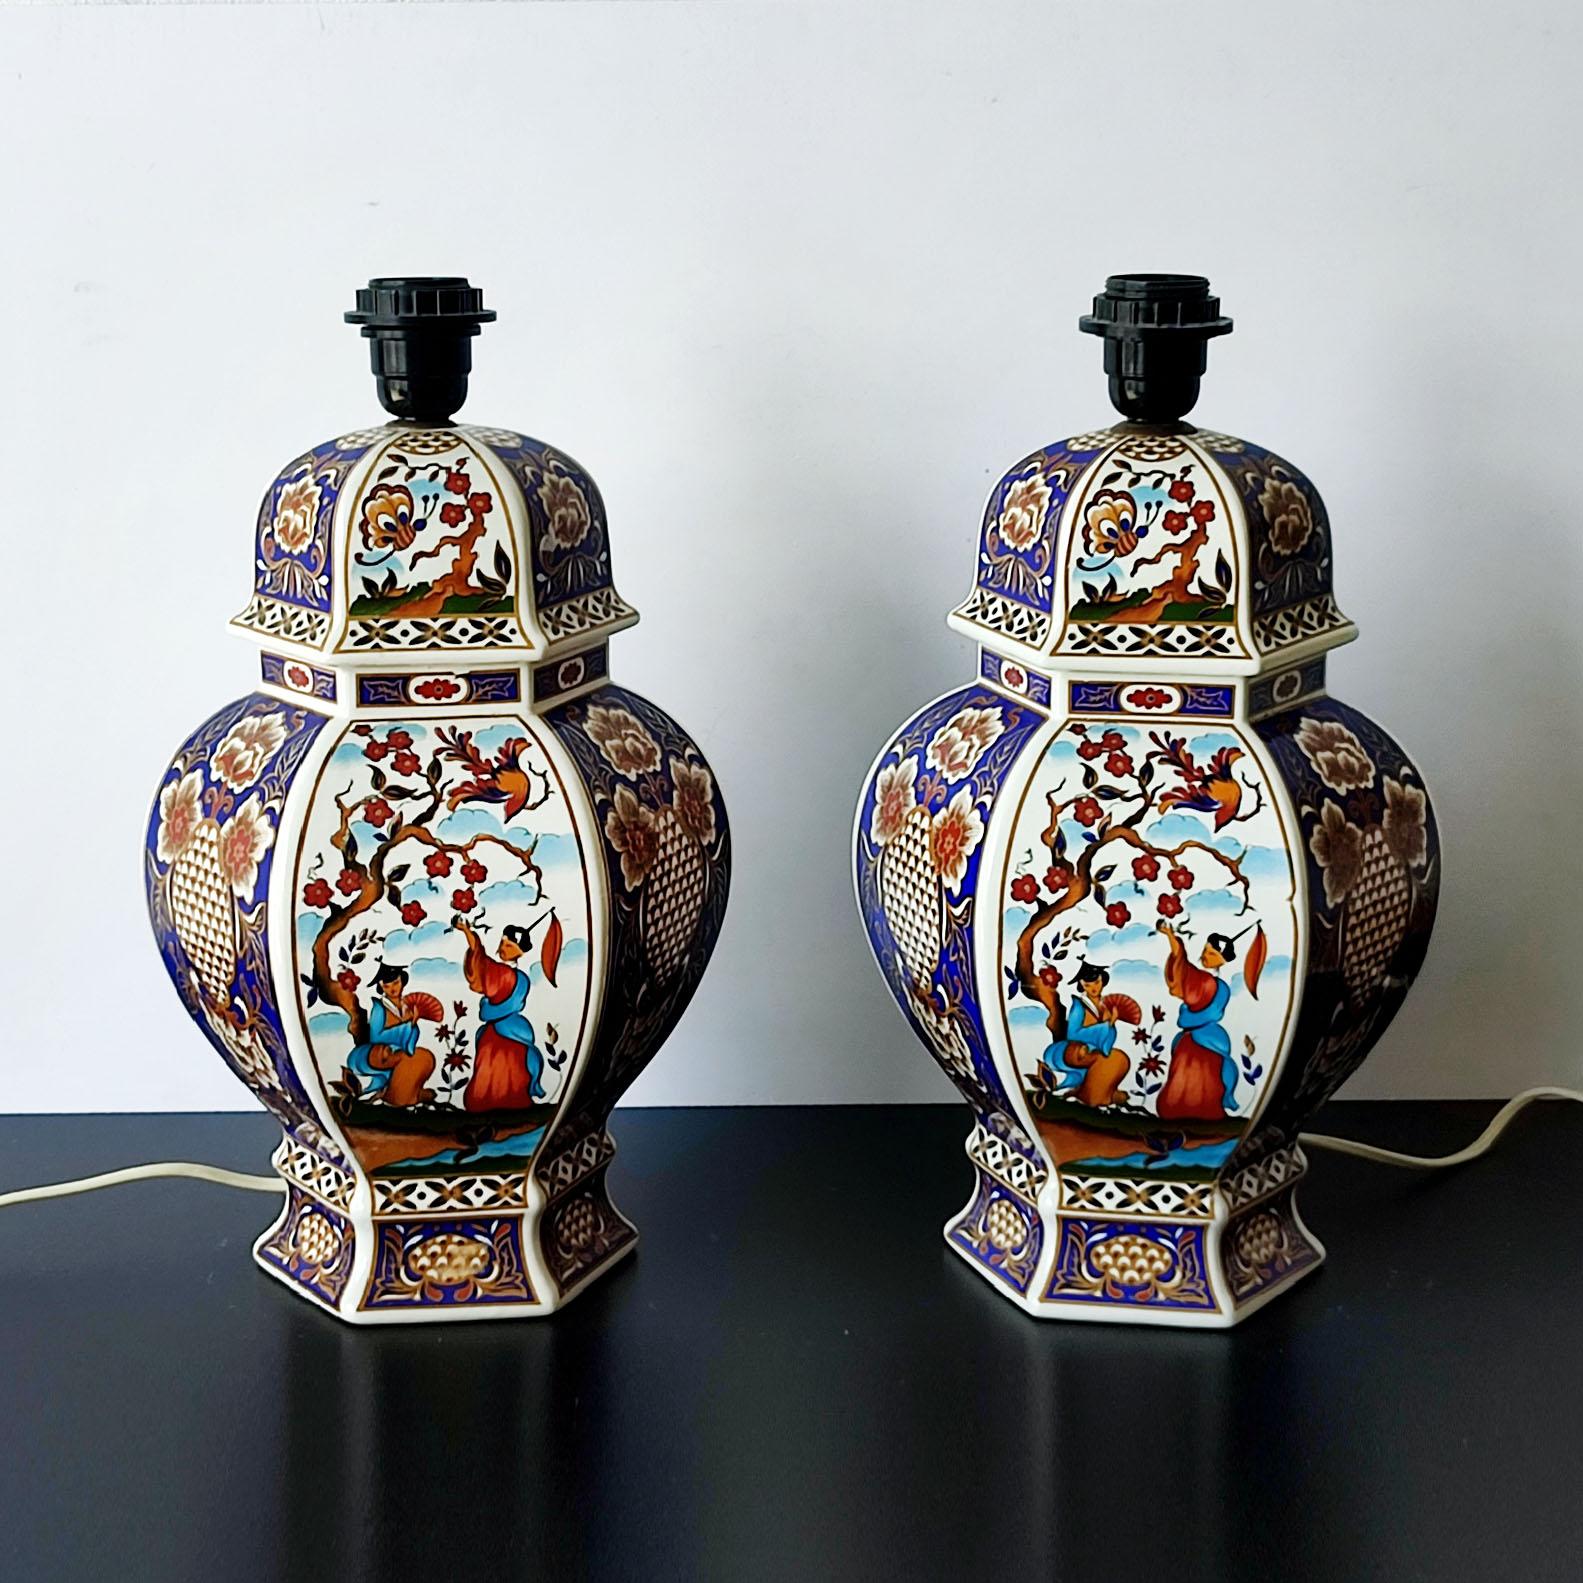 Pair of Japanese Porcelain Table Lamps and a Lidded Urn, Mid-20th Century For Sale 1